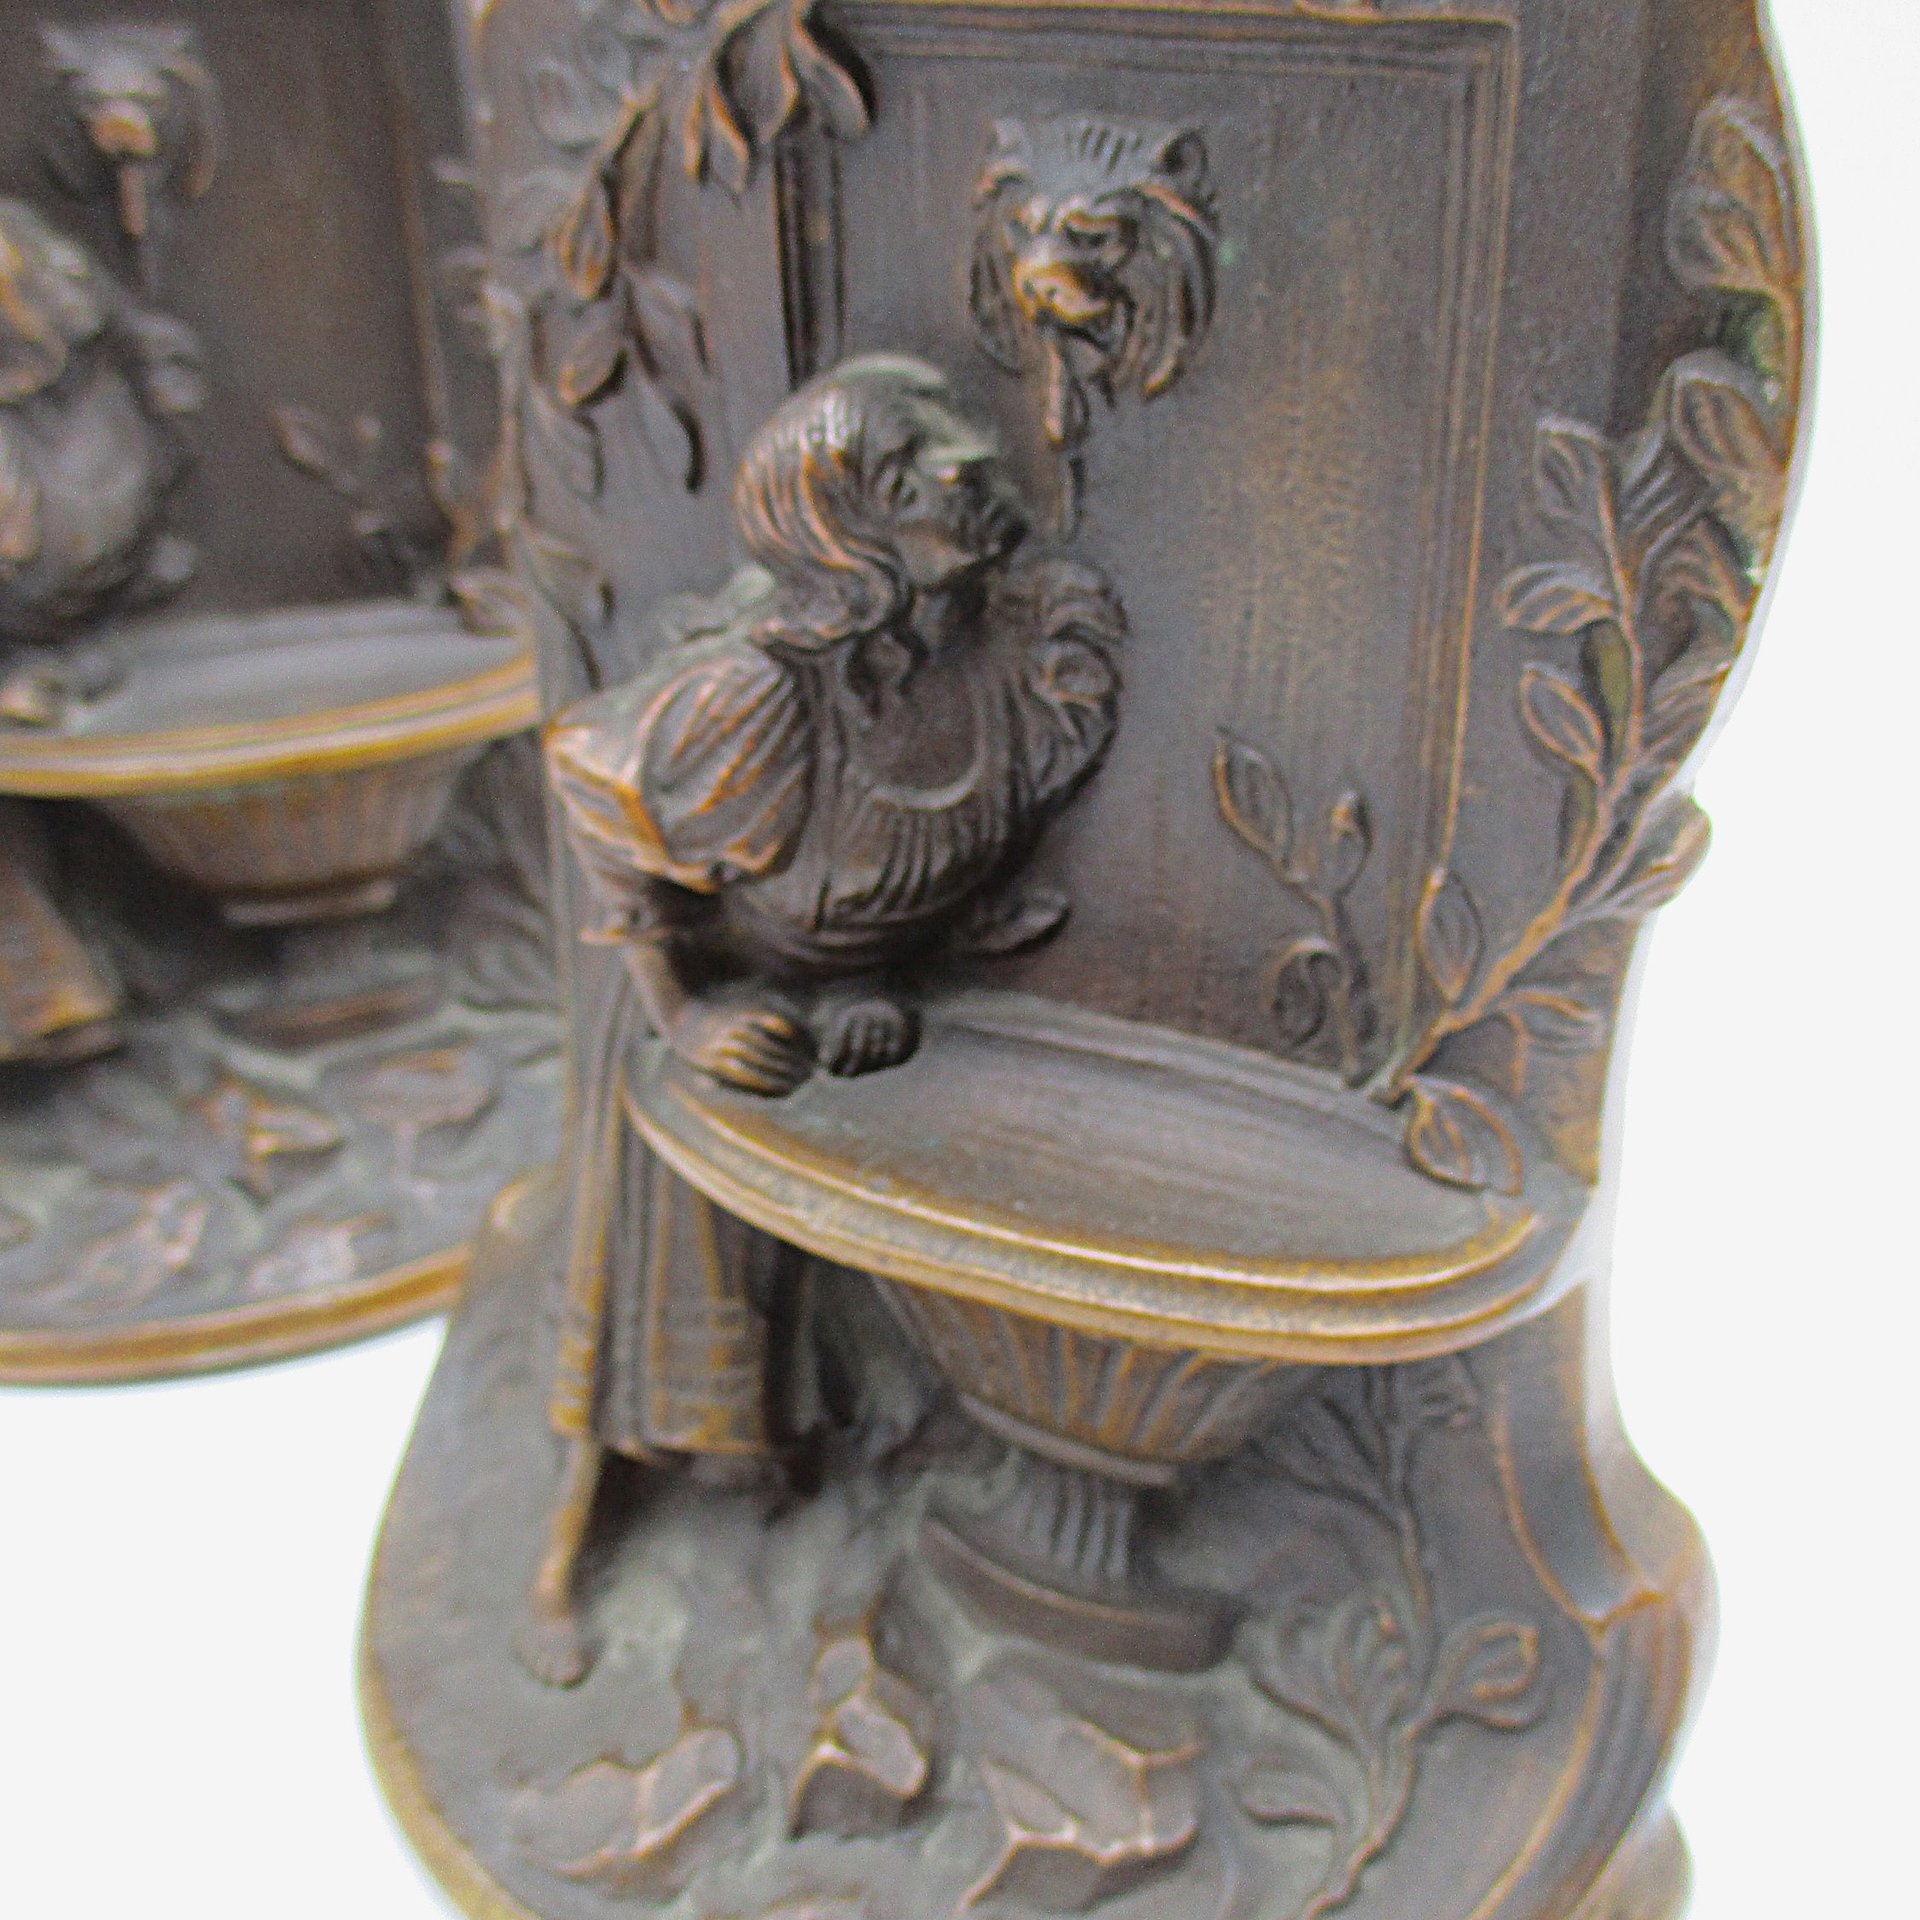 Solid Bronze Bookends, Girl at Fountain, Lions Head Faucet, Antique Heavy Bookends, Old World French Decor, Art Nouveau, 1920s